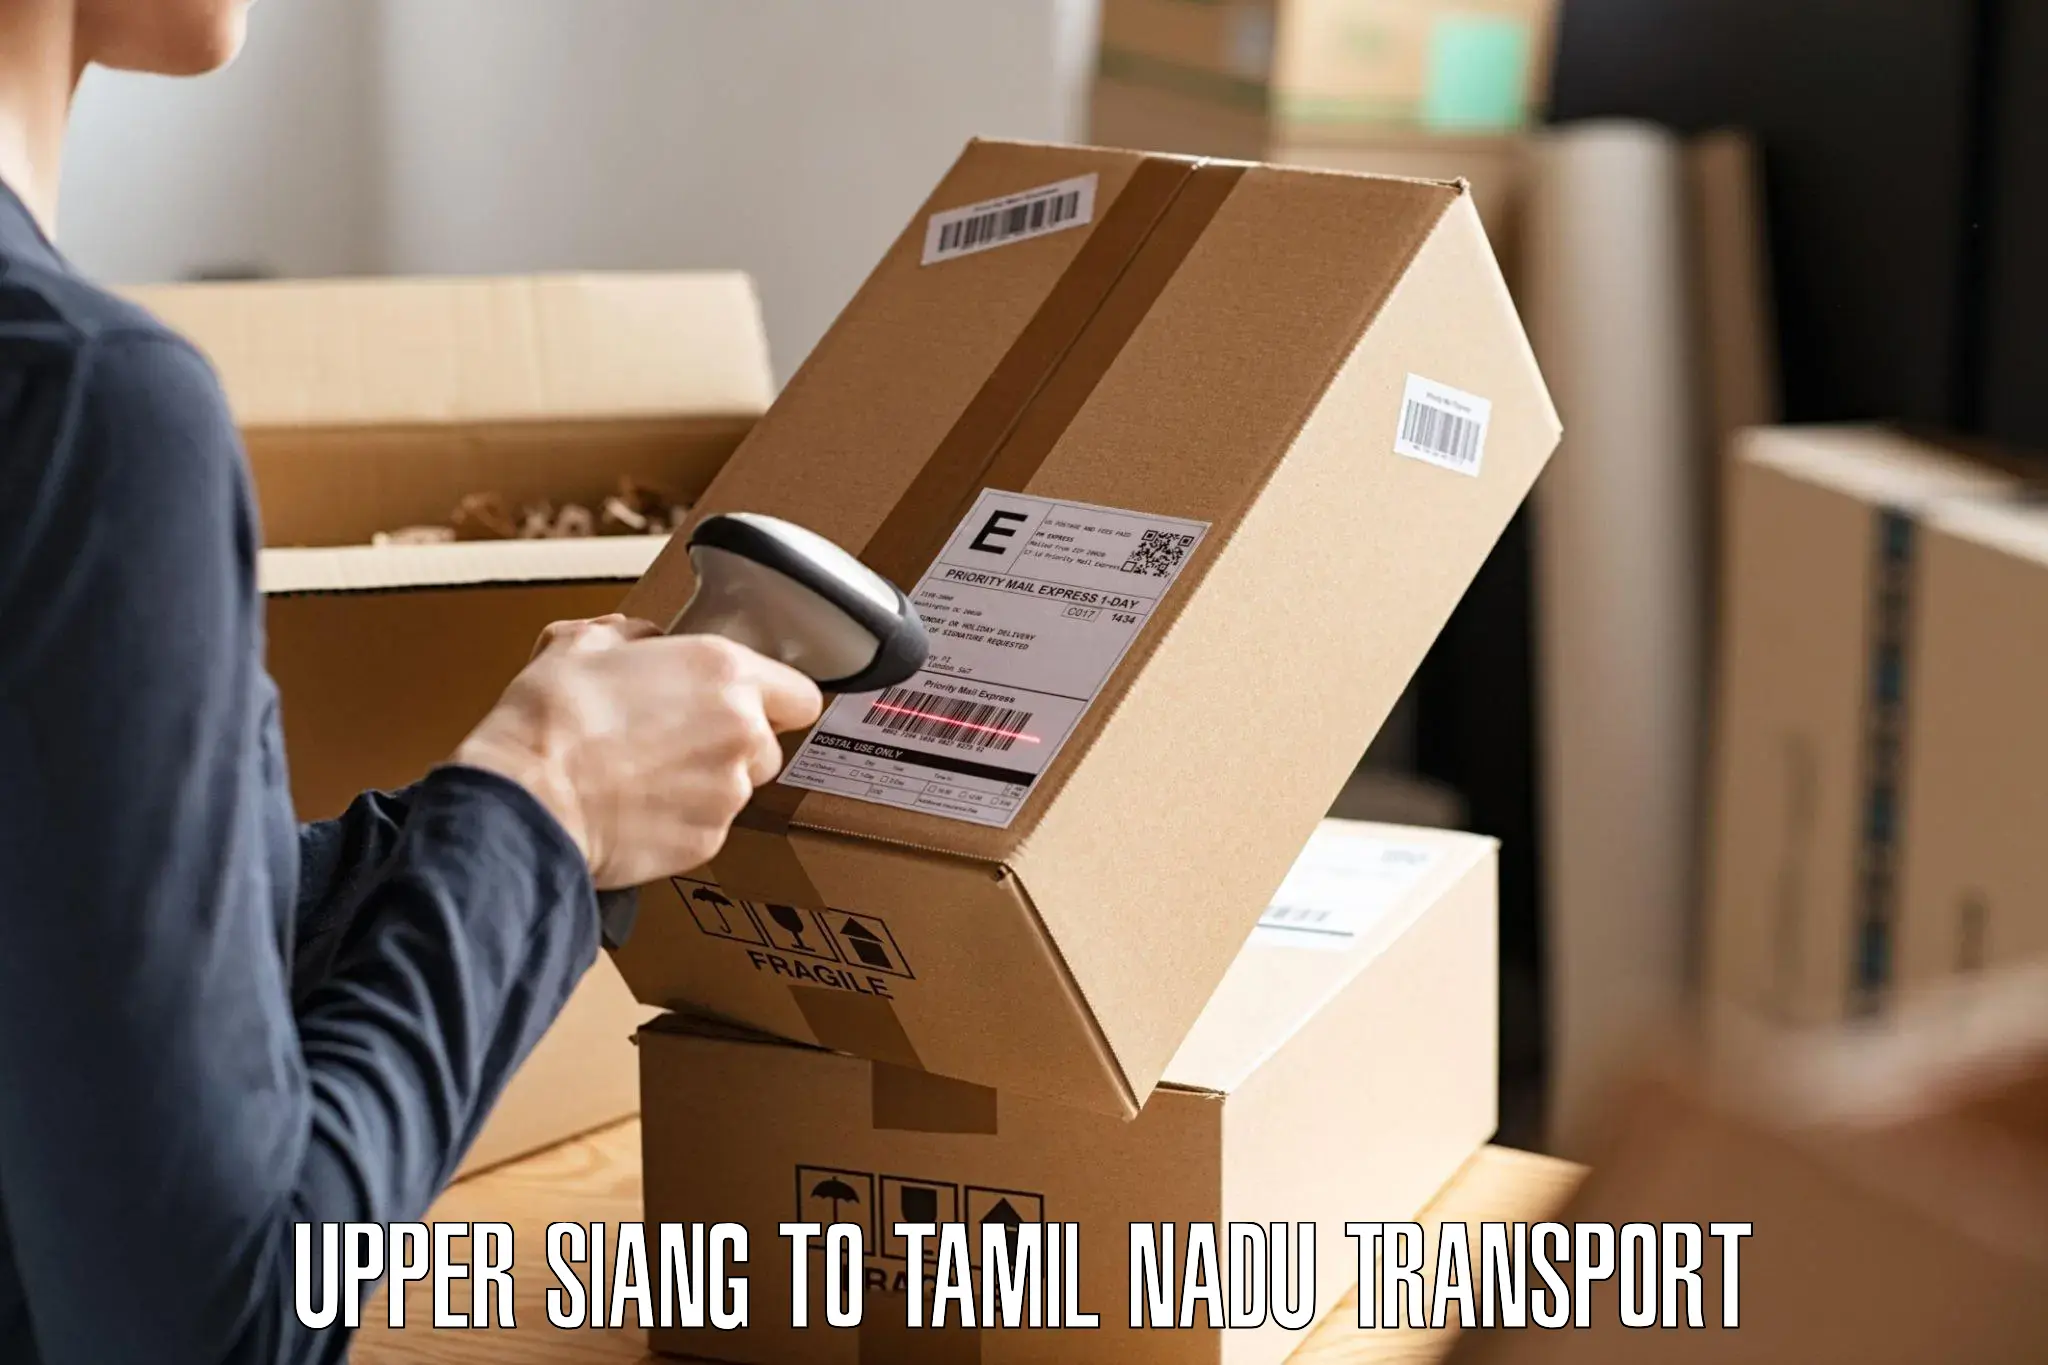 Furniture transport service Upper Siang to Papanasam